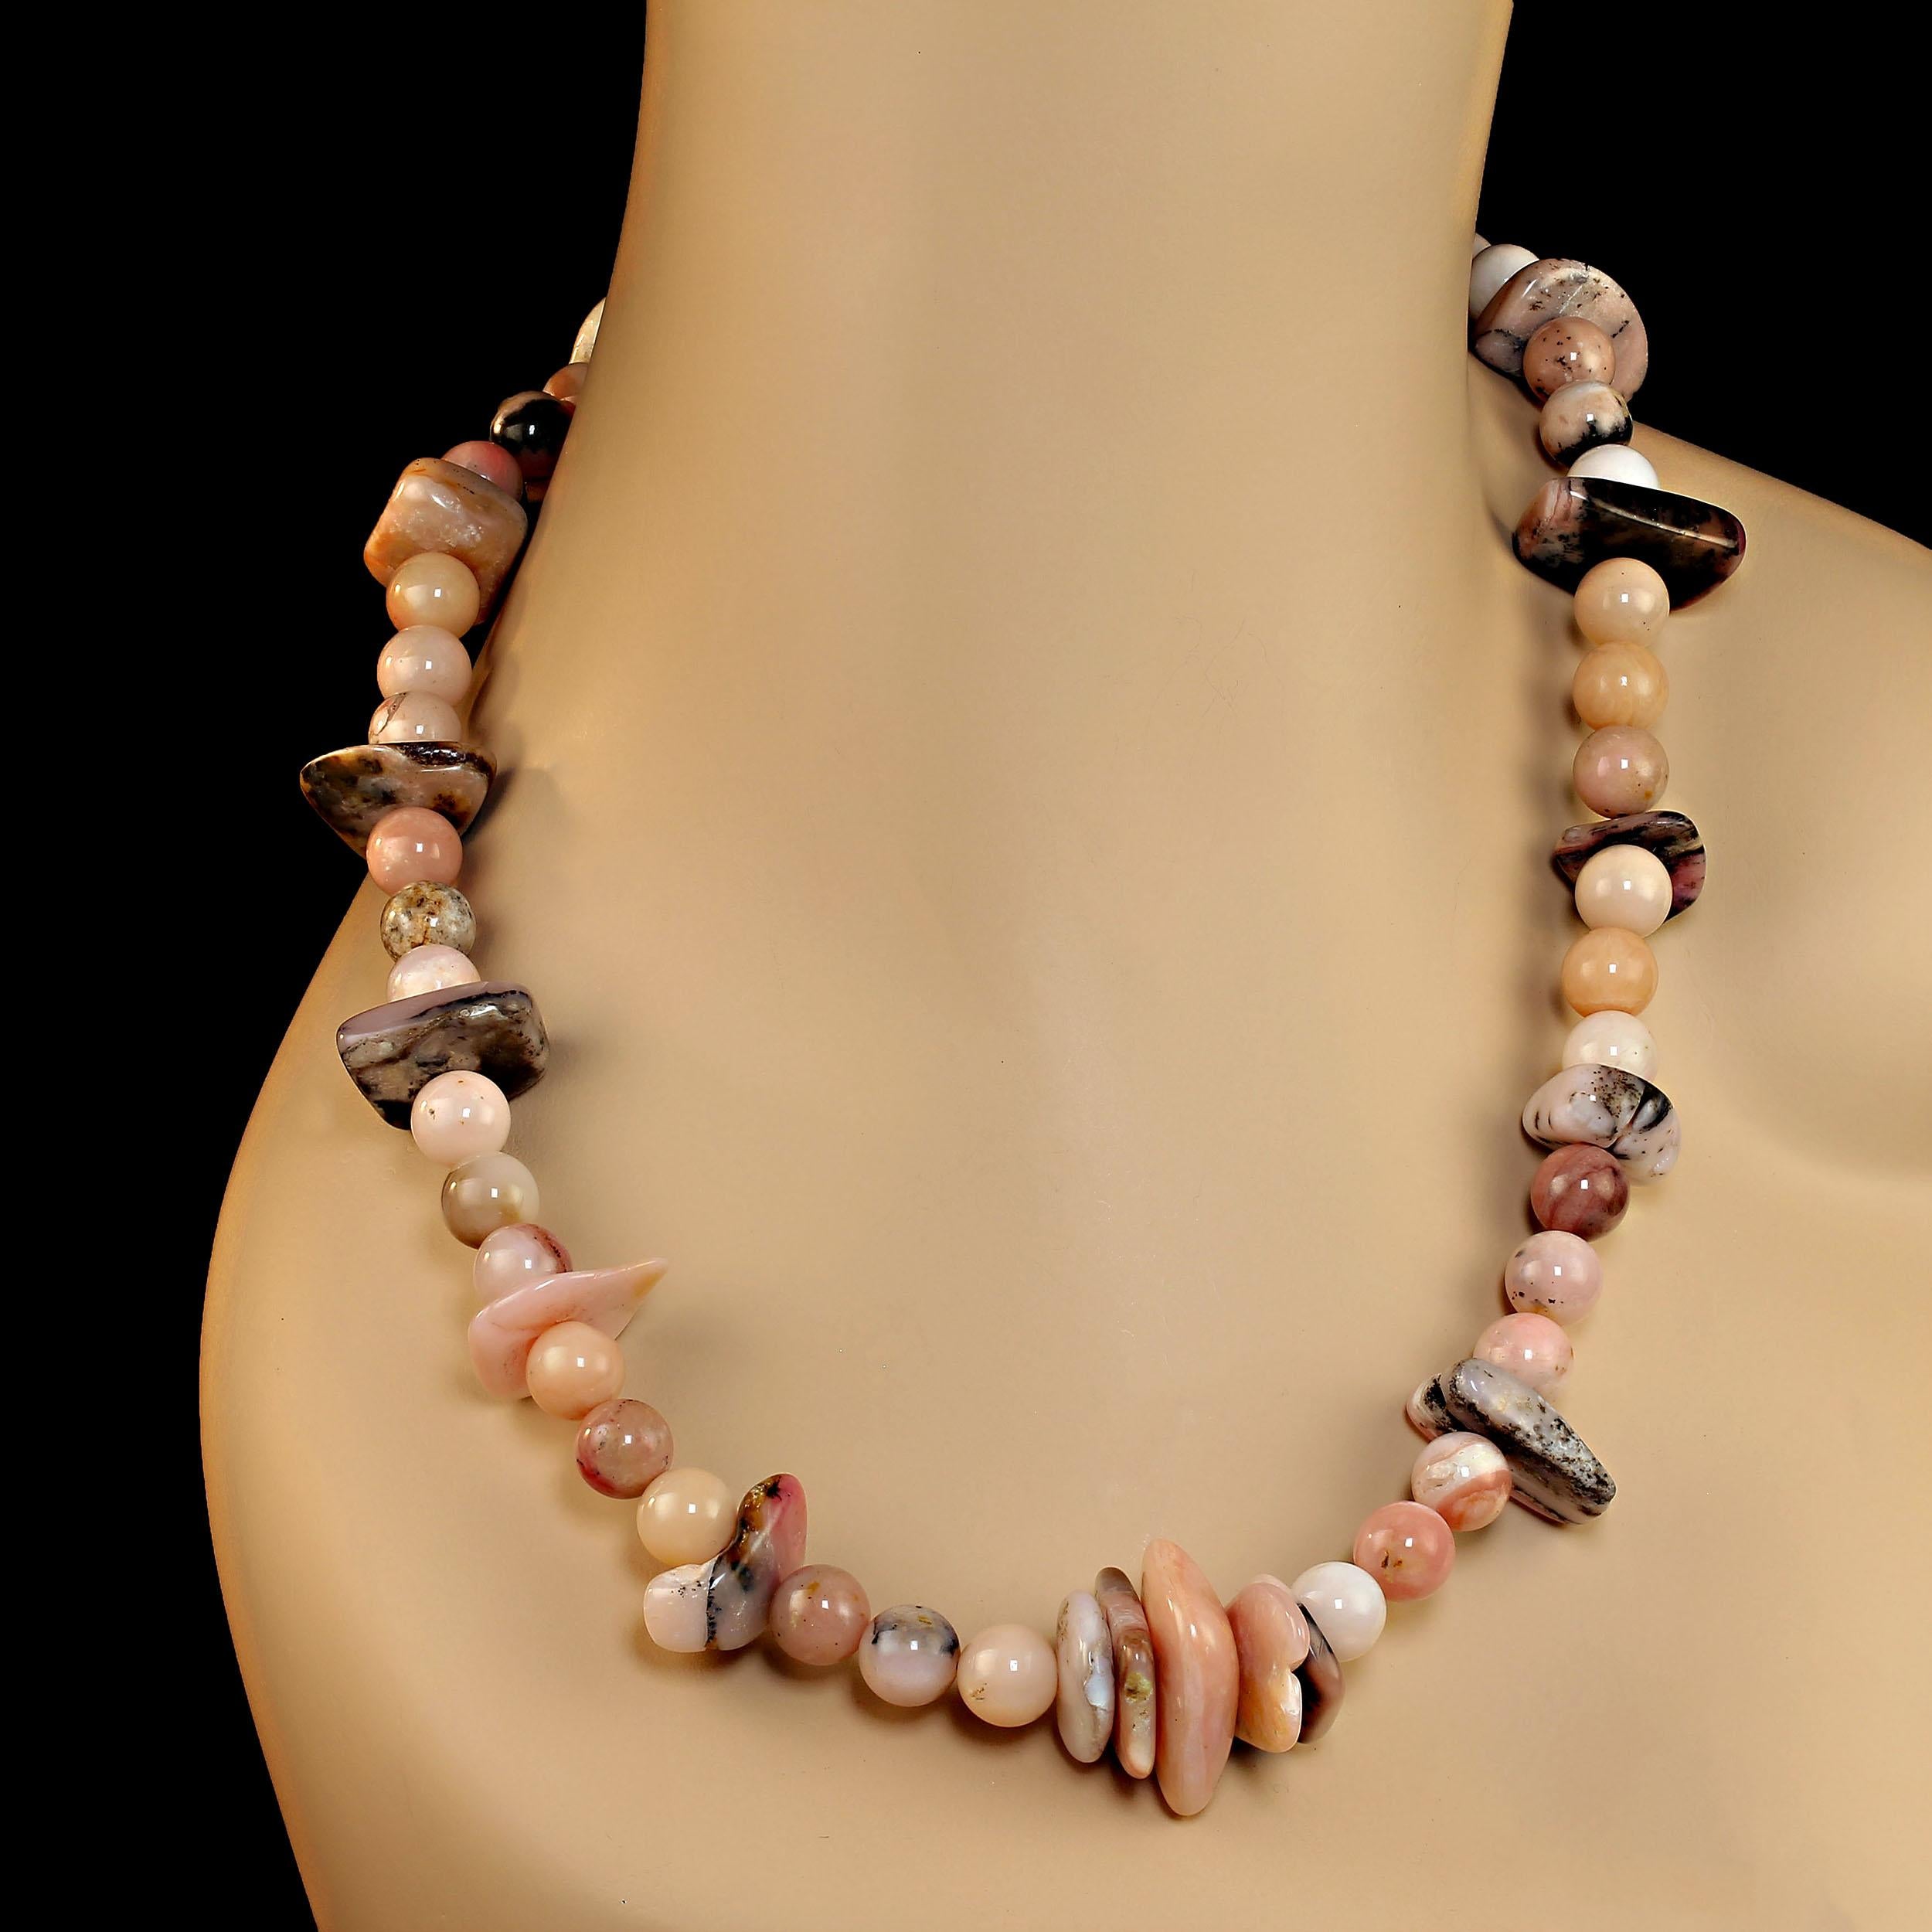 Artisan AJD 25 Inch Pink Peruvian Opal necklace perfect for Winter  For Sale